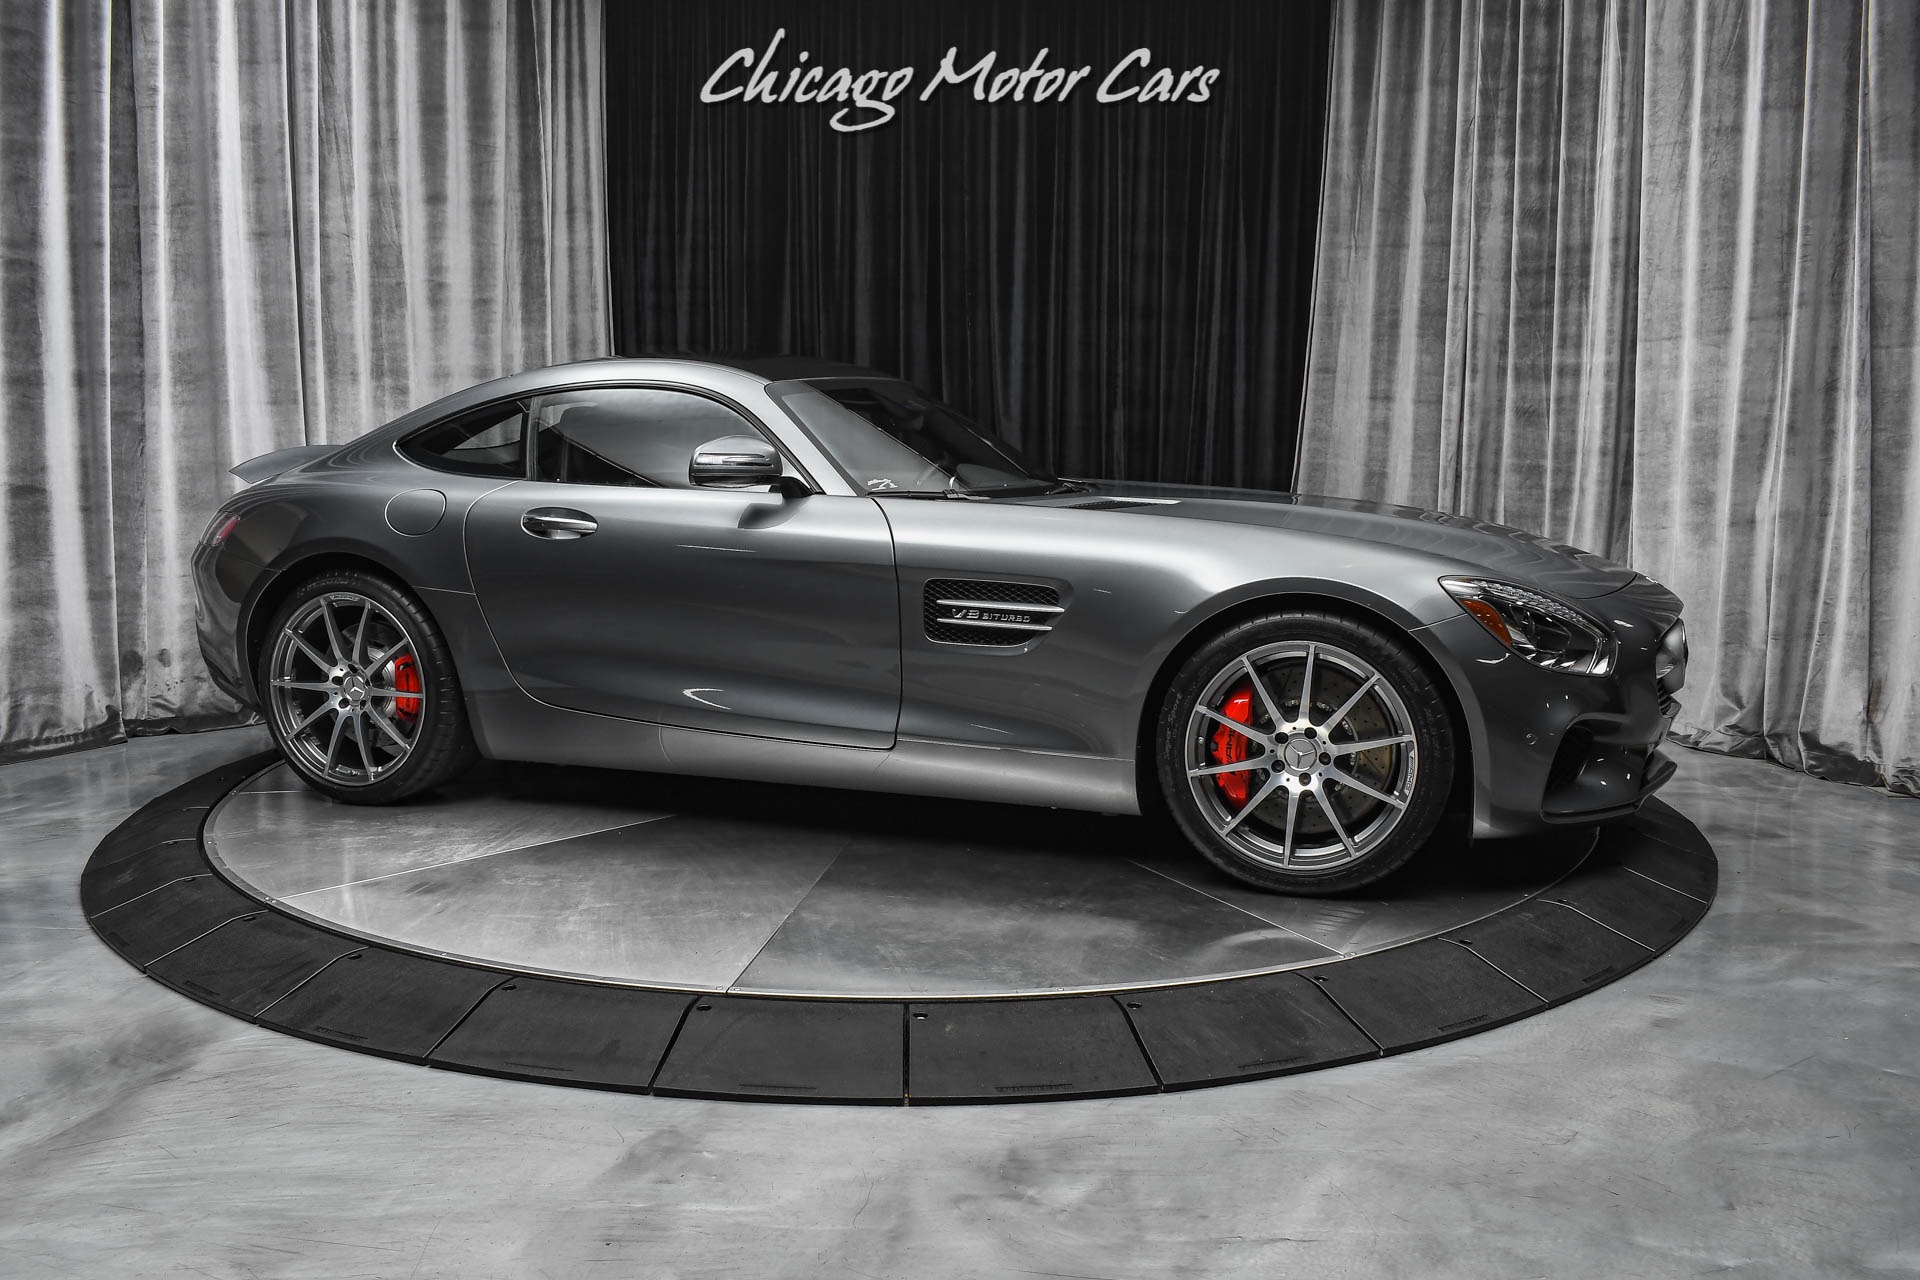 Used-2016-Mercedes-Benz-AMG-GT-S-Exclusive-Interior-Package-Panoramic-Glass-Roof-Low-Miles